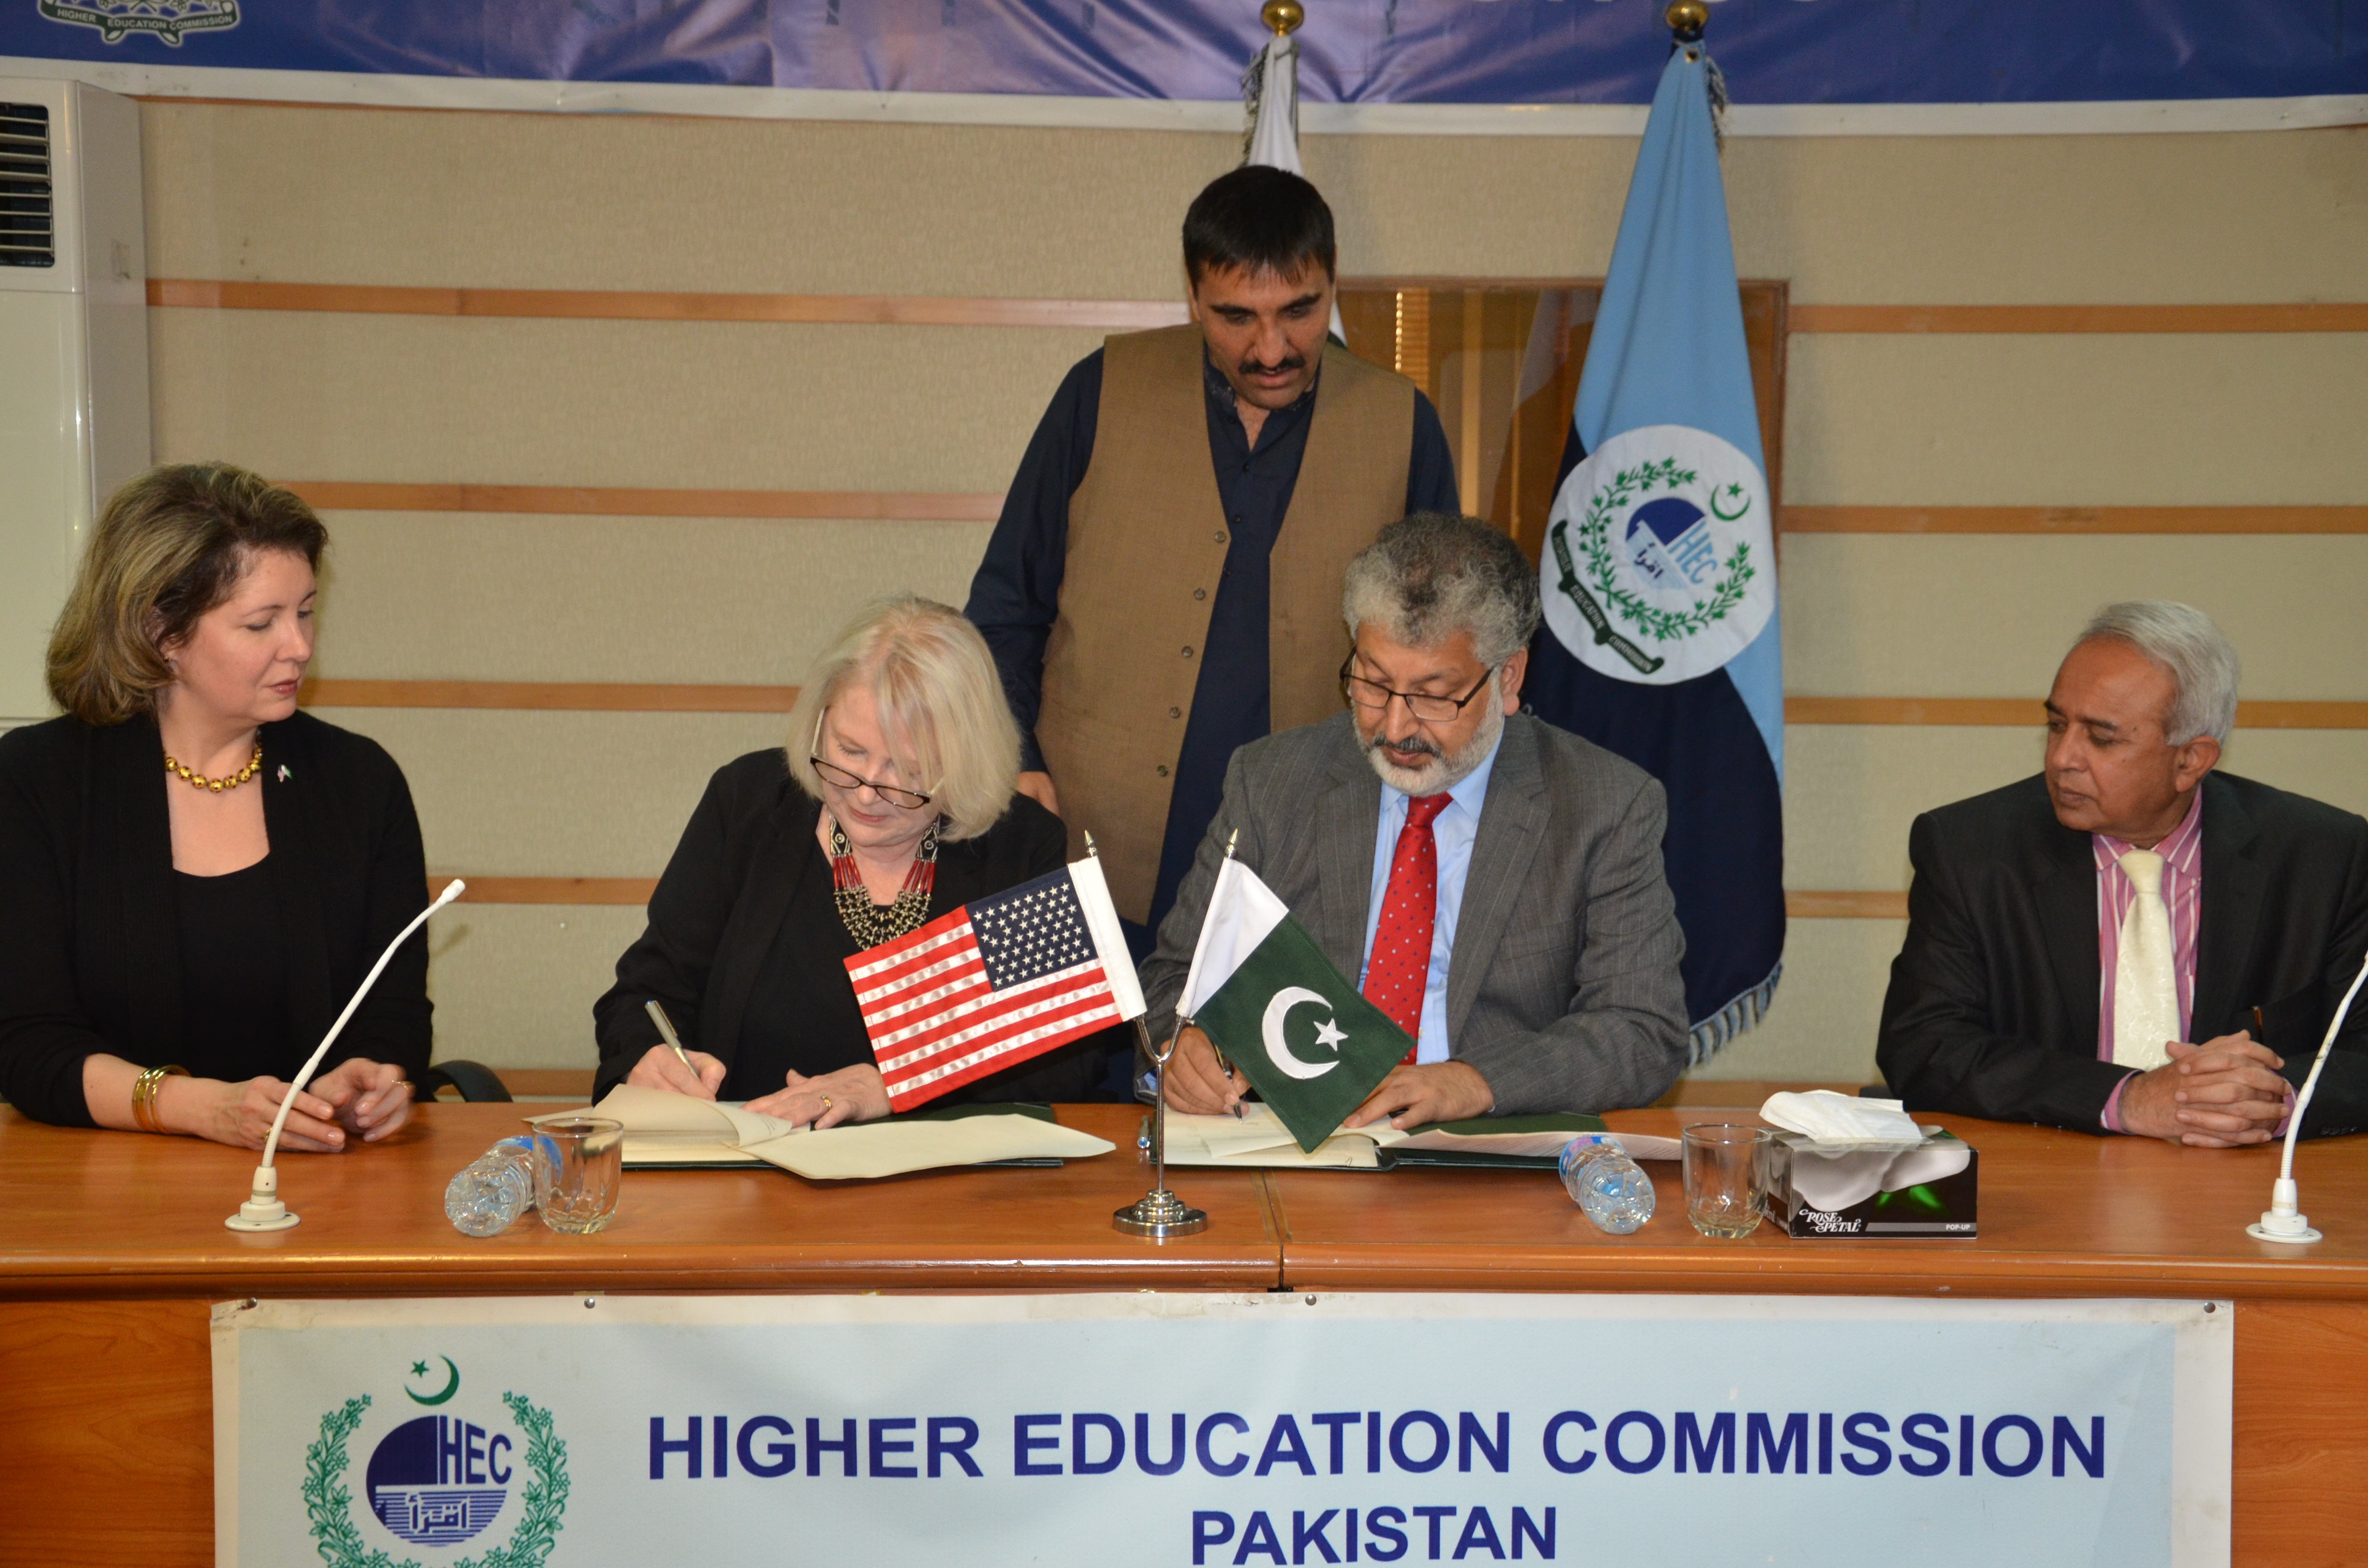 (L-R) Ms. Christina Tomlinson, Counselor Public Affairs, U.S. Embassy; Ms. Rita Akhtar, Executive Director, USEFP; Dr. Mukhtar Ahmed, Chairman, HEC; Dr. Ghulam Bhatti, Member HRD, HEC; (standing) Mr. Jehanzeb Khan, Project Director, HEC